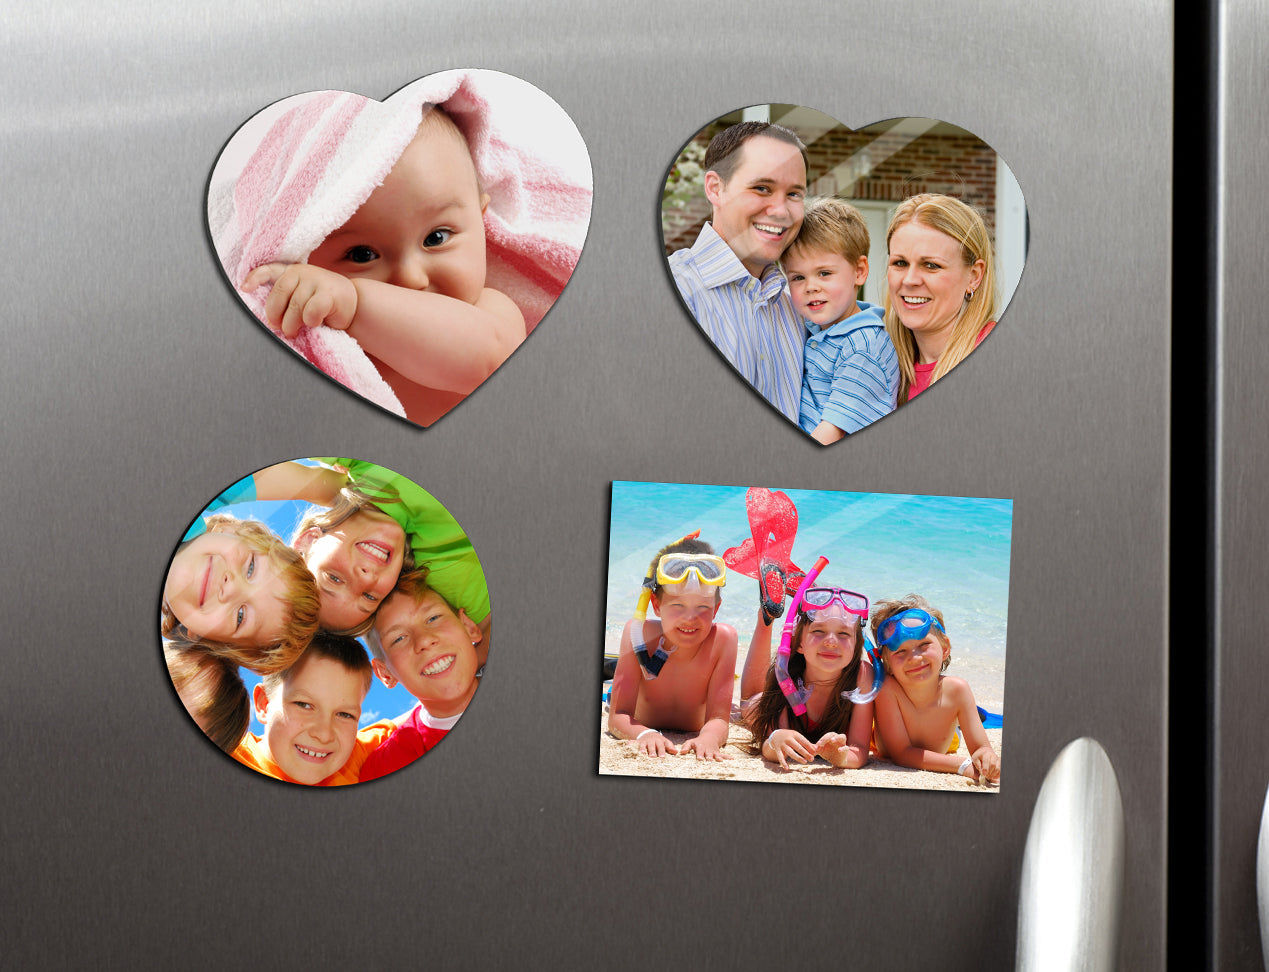 Fun Fridge Magnets as Refrigerator decoration, in Fun Shapes Heart, Round and Rectangle